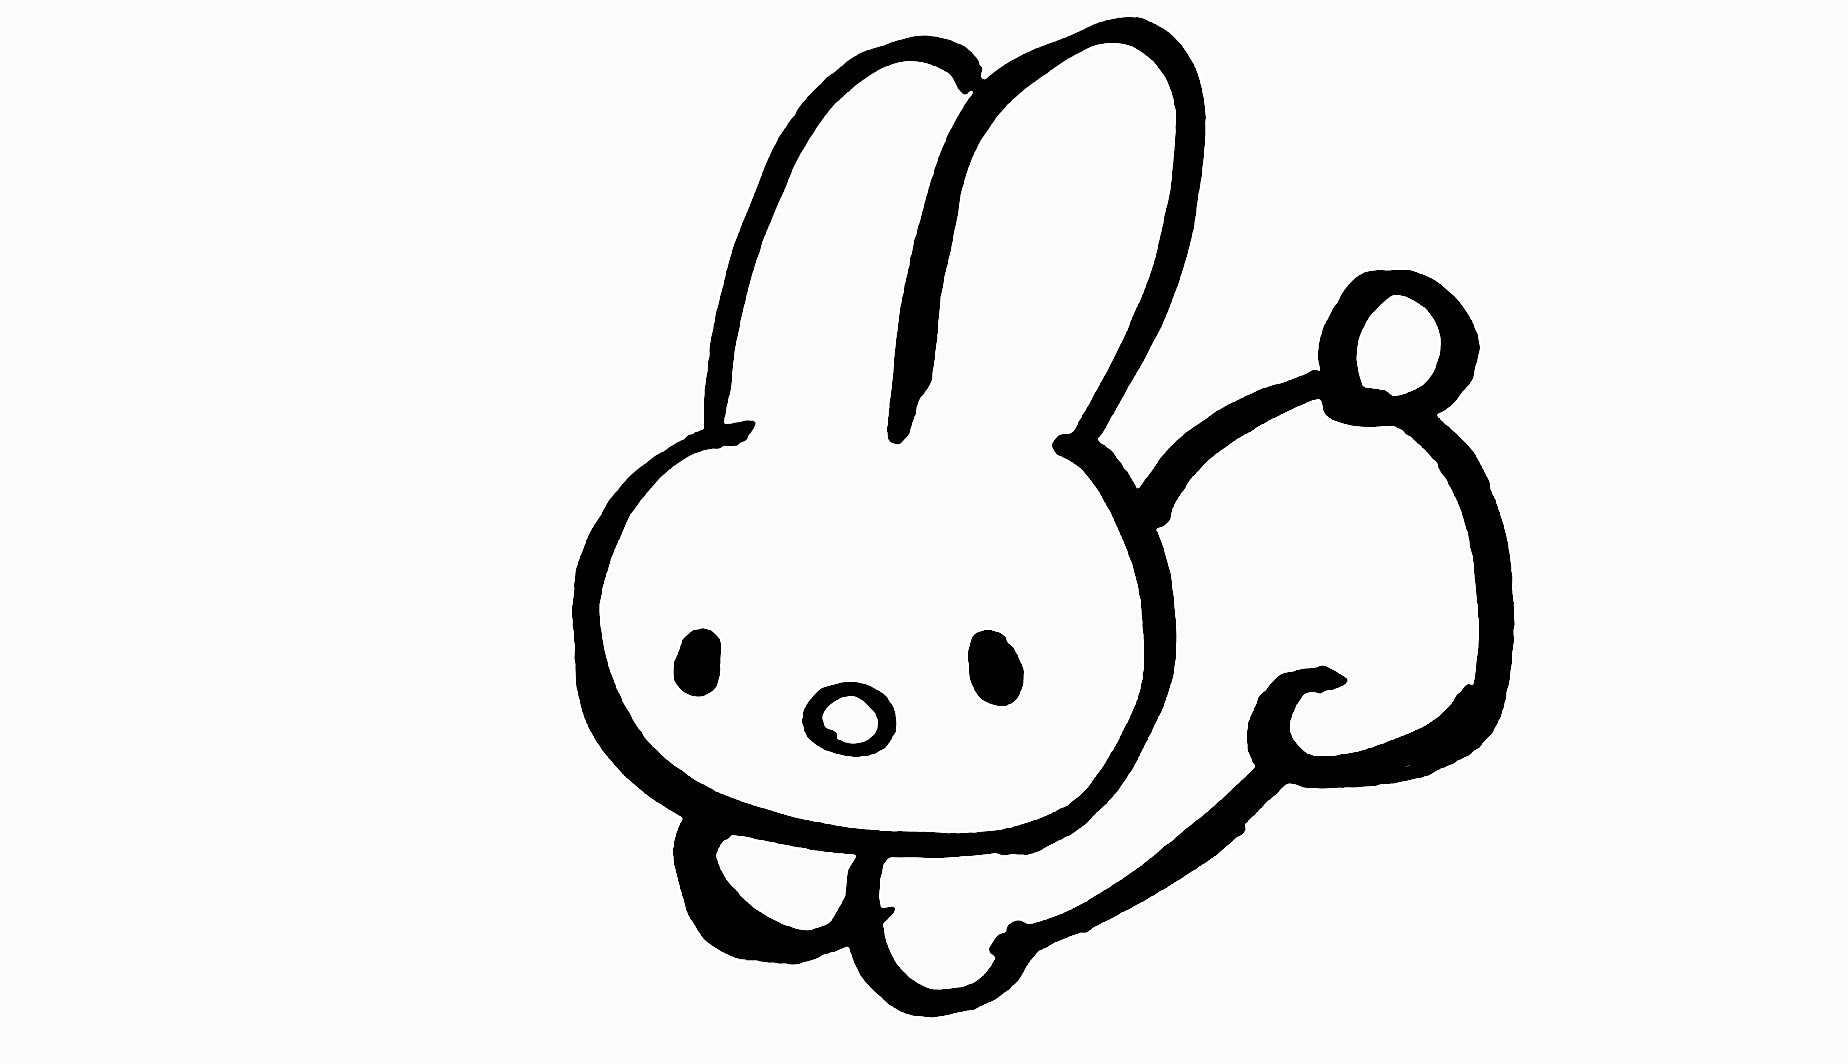 Great How Do You Draw A Cute Bunny of all time Learn more here 